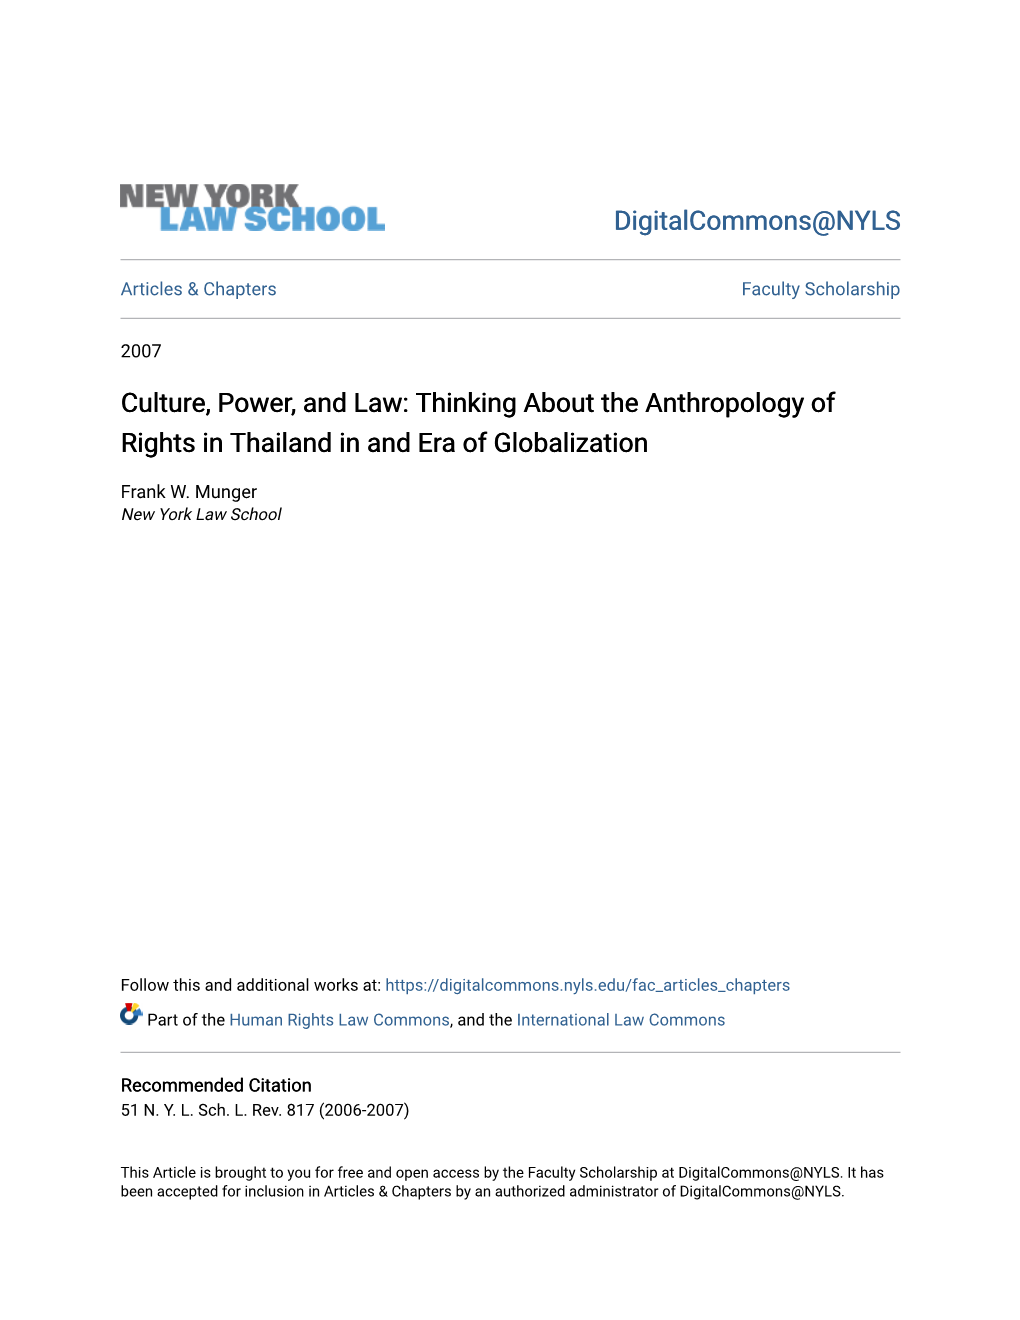 Culture, Power, and Law: Thinking About the Anthropology of Rights in Thailand in and Era of Globalization